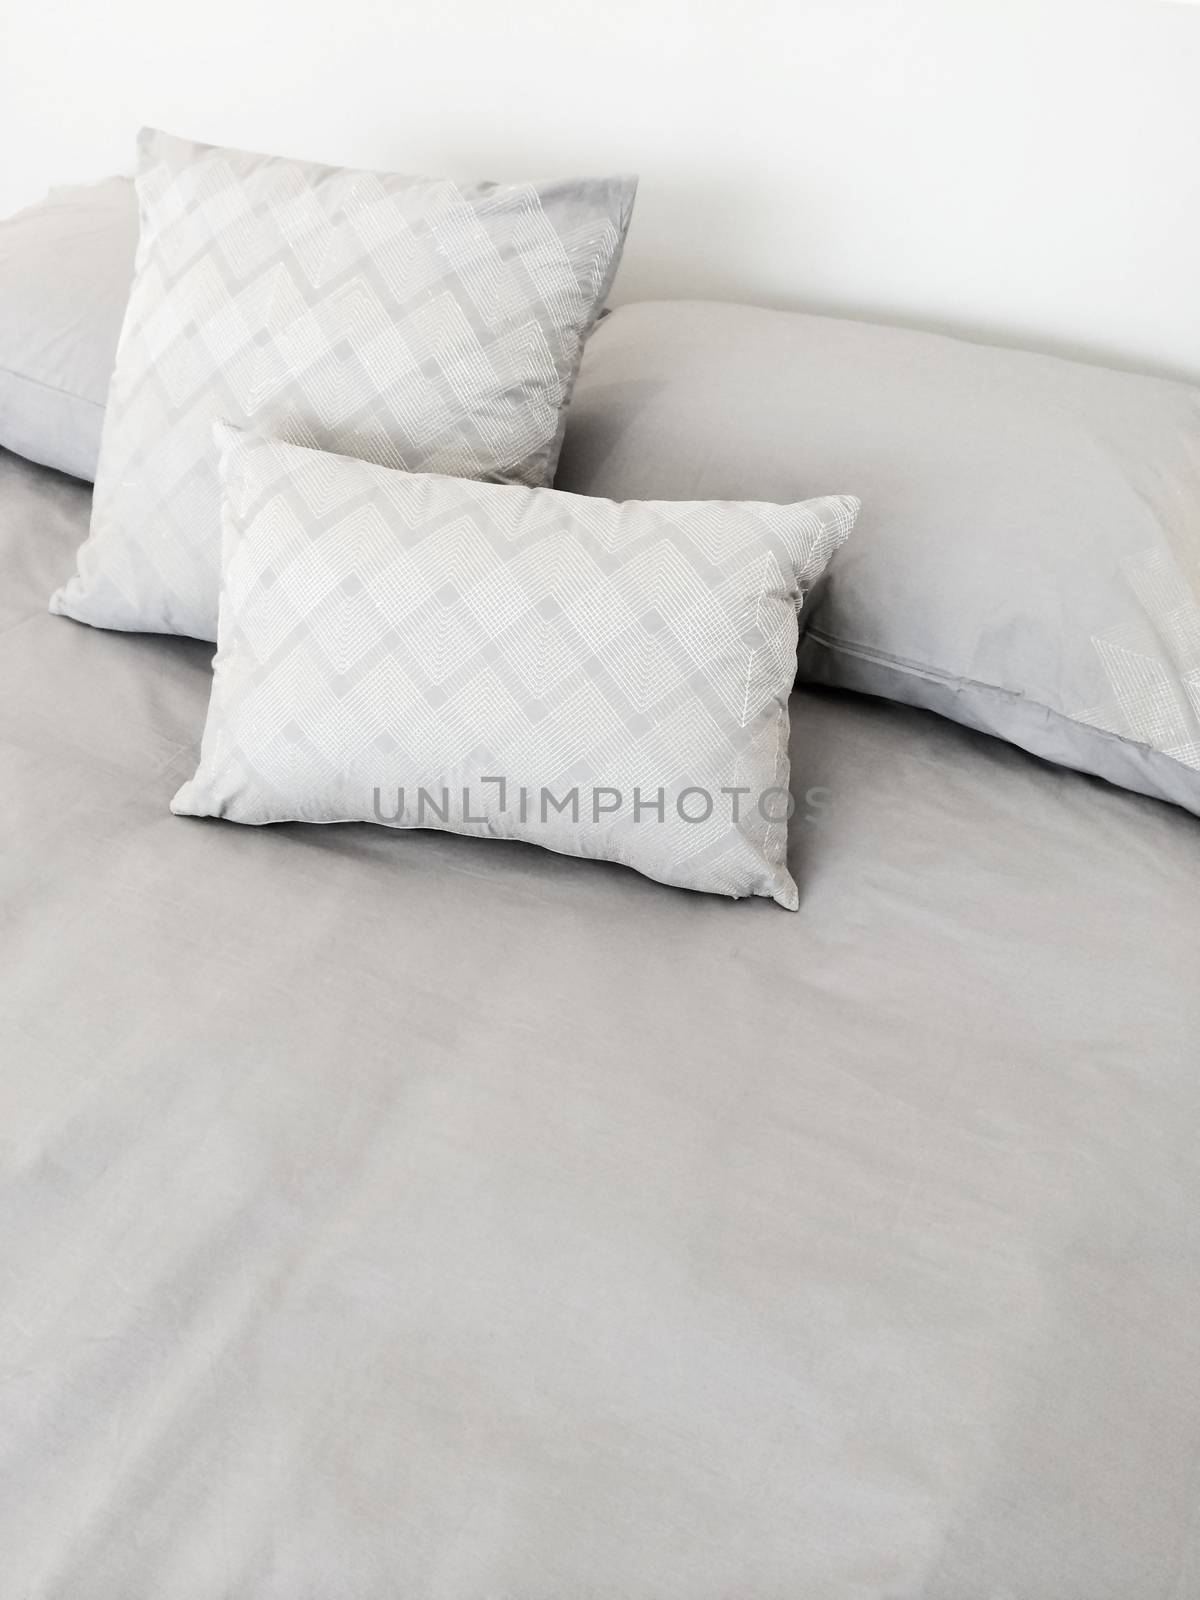 Bed with grey bed linen and pillows.